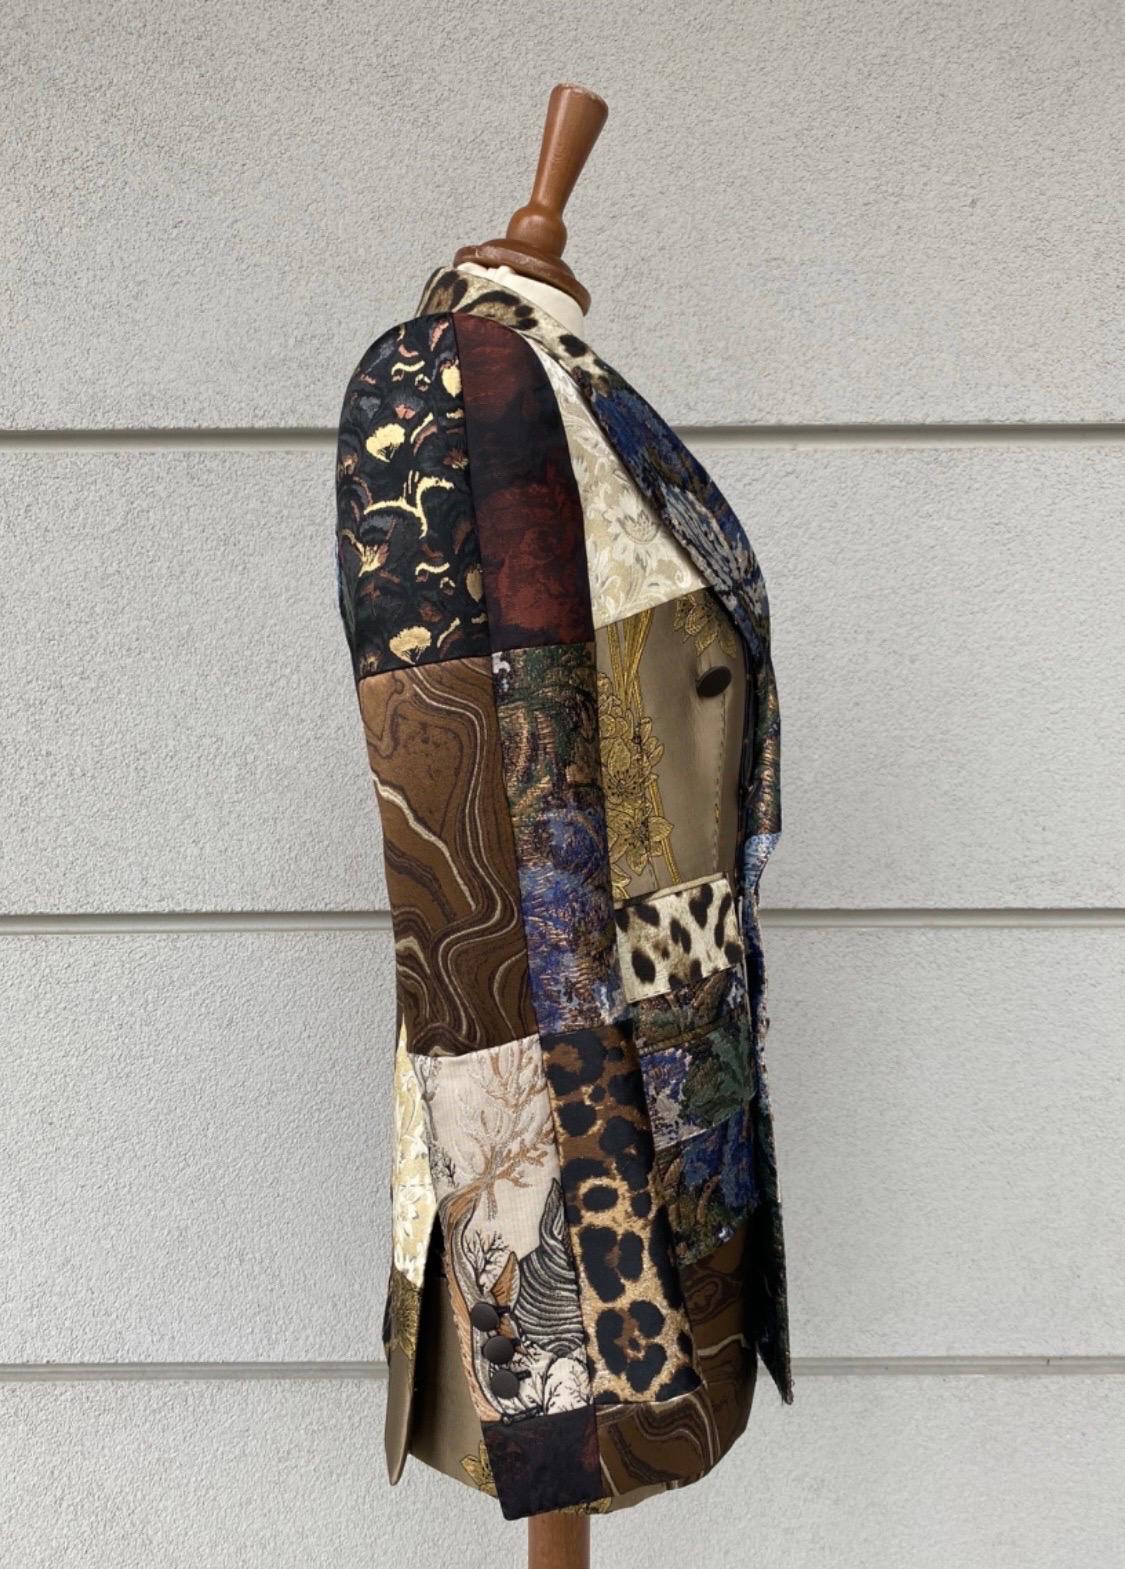 Dolce & Gabbana jacket + gilet. 
the jacket is an Italian size 38 the gilet is an Italian size 42.
Featuring mixed material and pattern with golden and metallic parts.
jacket measurements size 38: shoulder 42cm sleeve 62cm chest 39cm length 73cm.